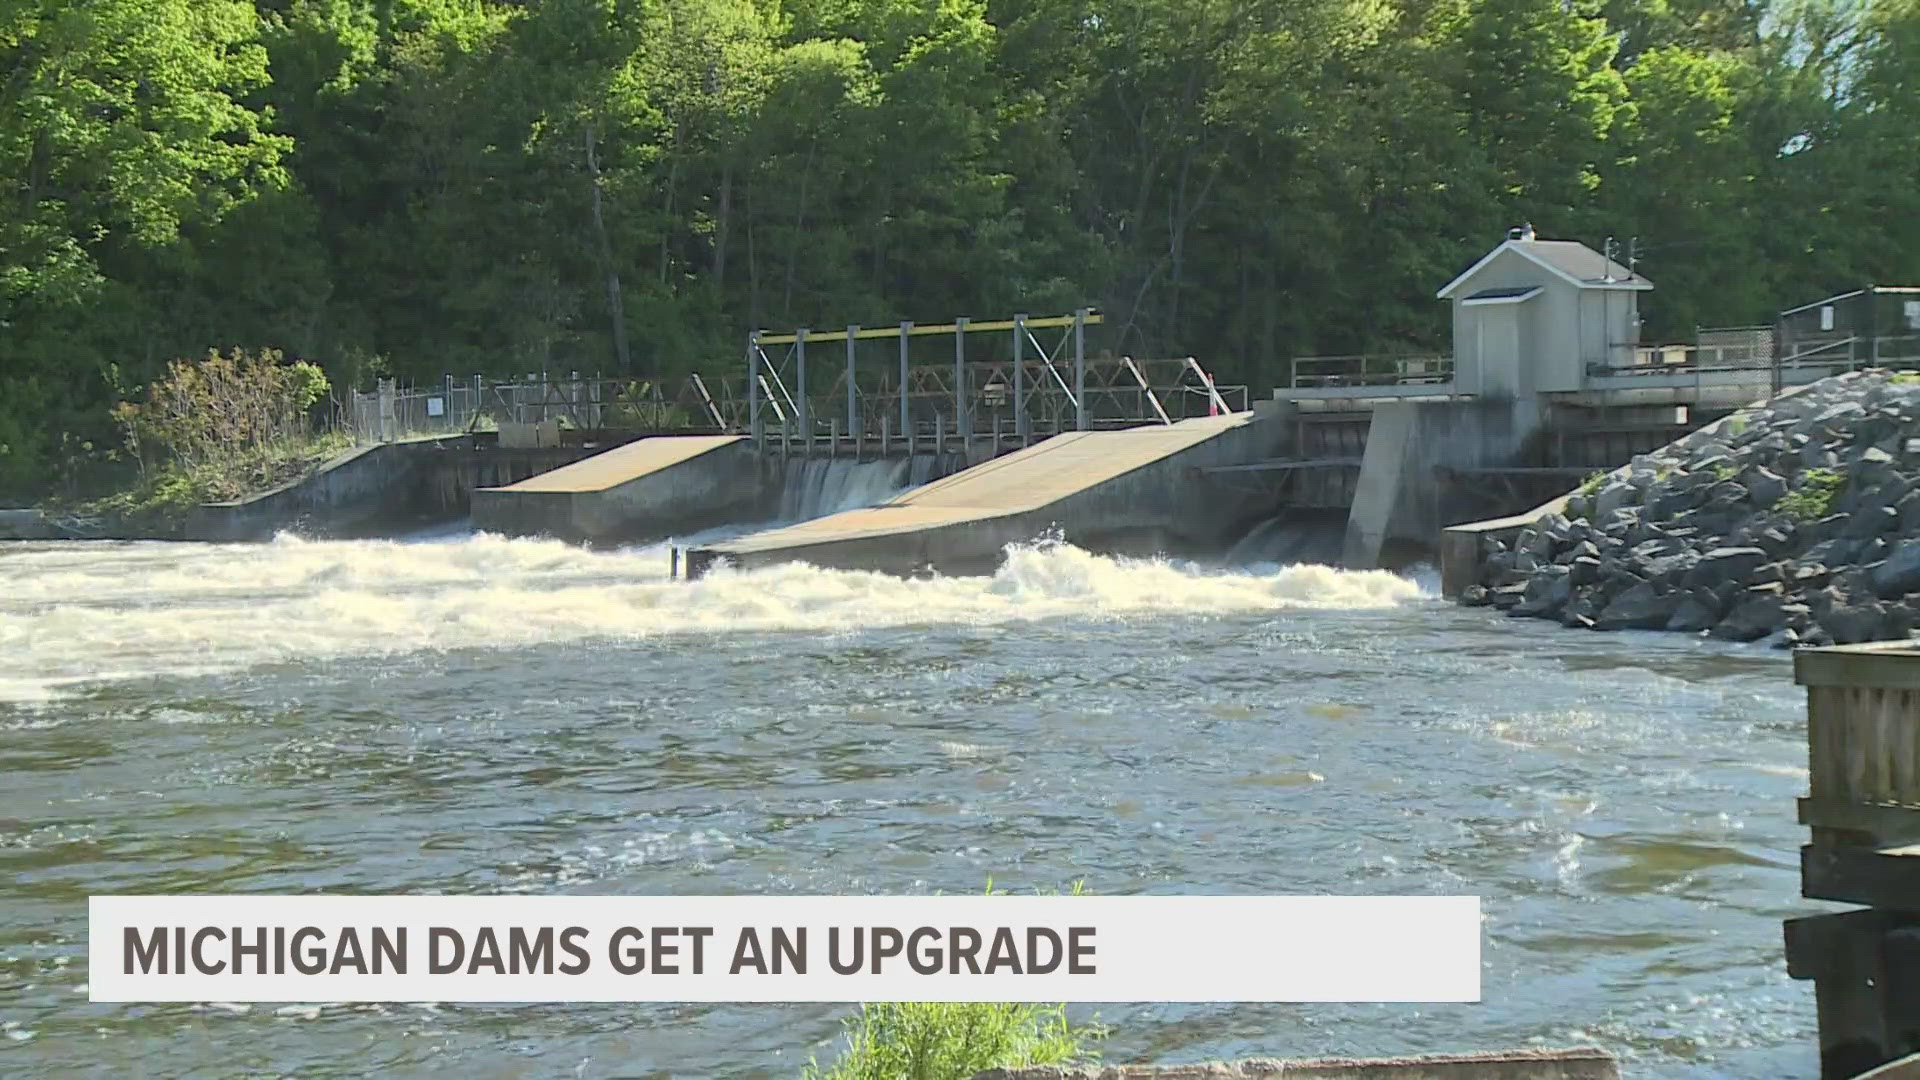 Among the list of 22 is the City of Allegan, which received $1.8 million to repair the Allegan Dam.